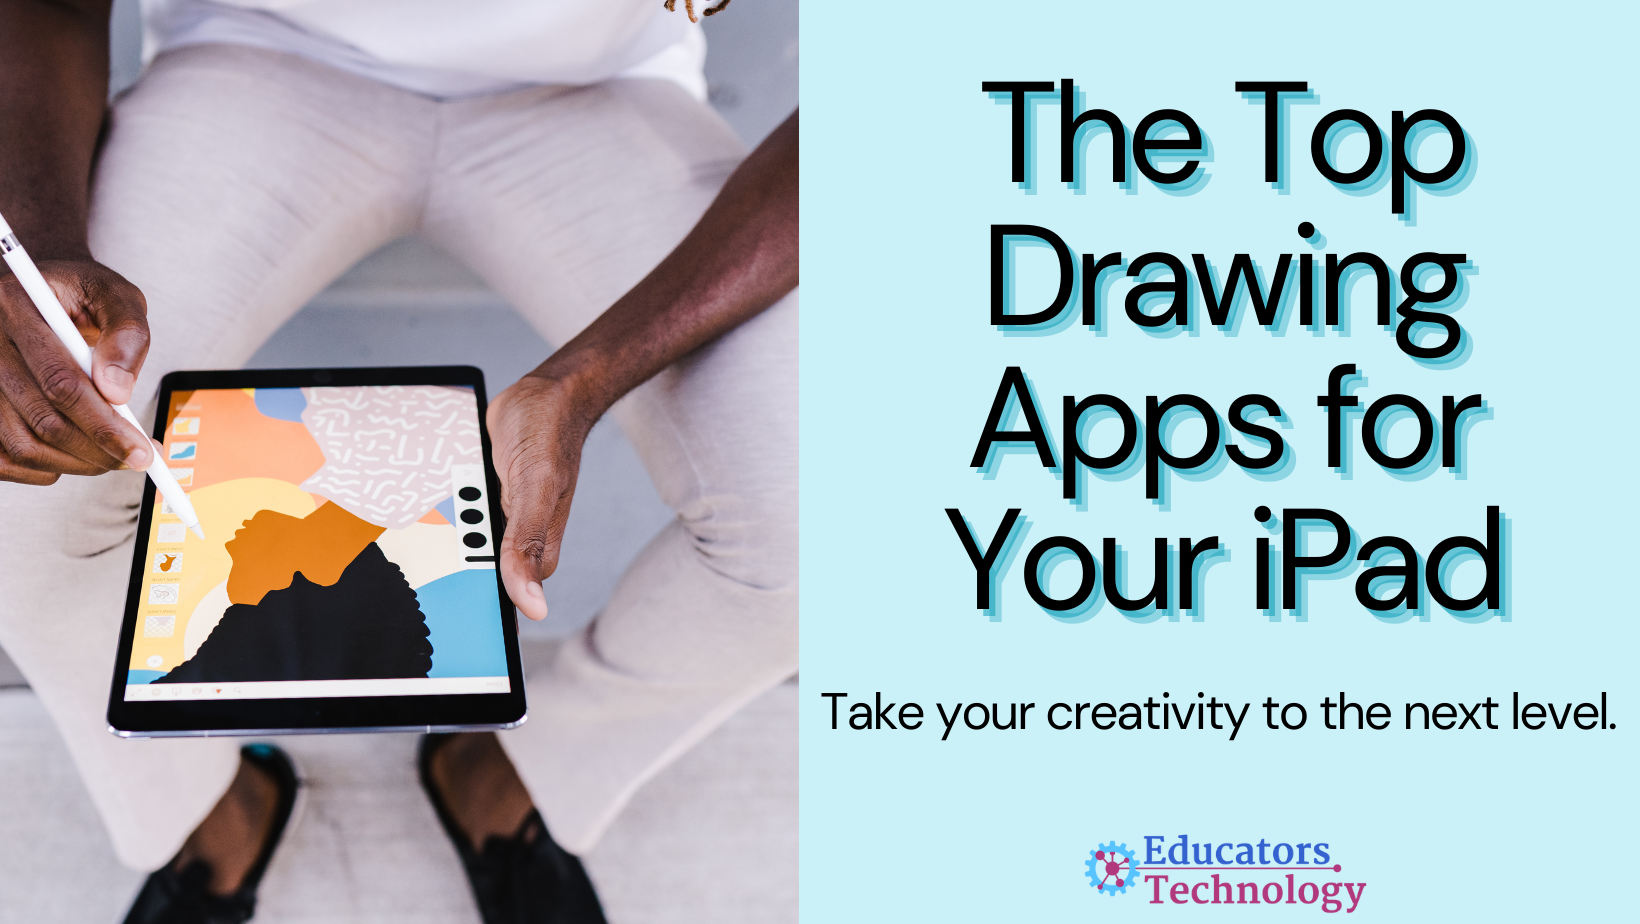 15 Best iPad And Android Painting And Drawing Apps For Kids